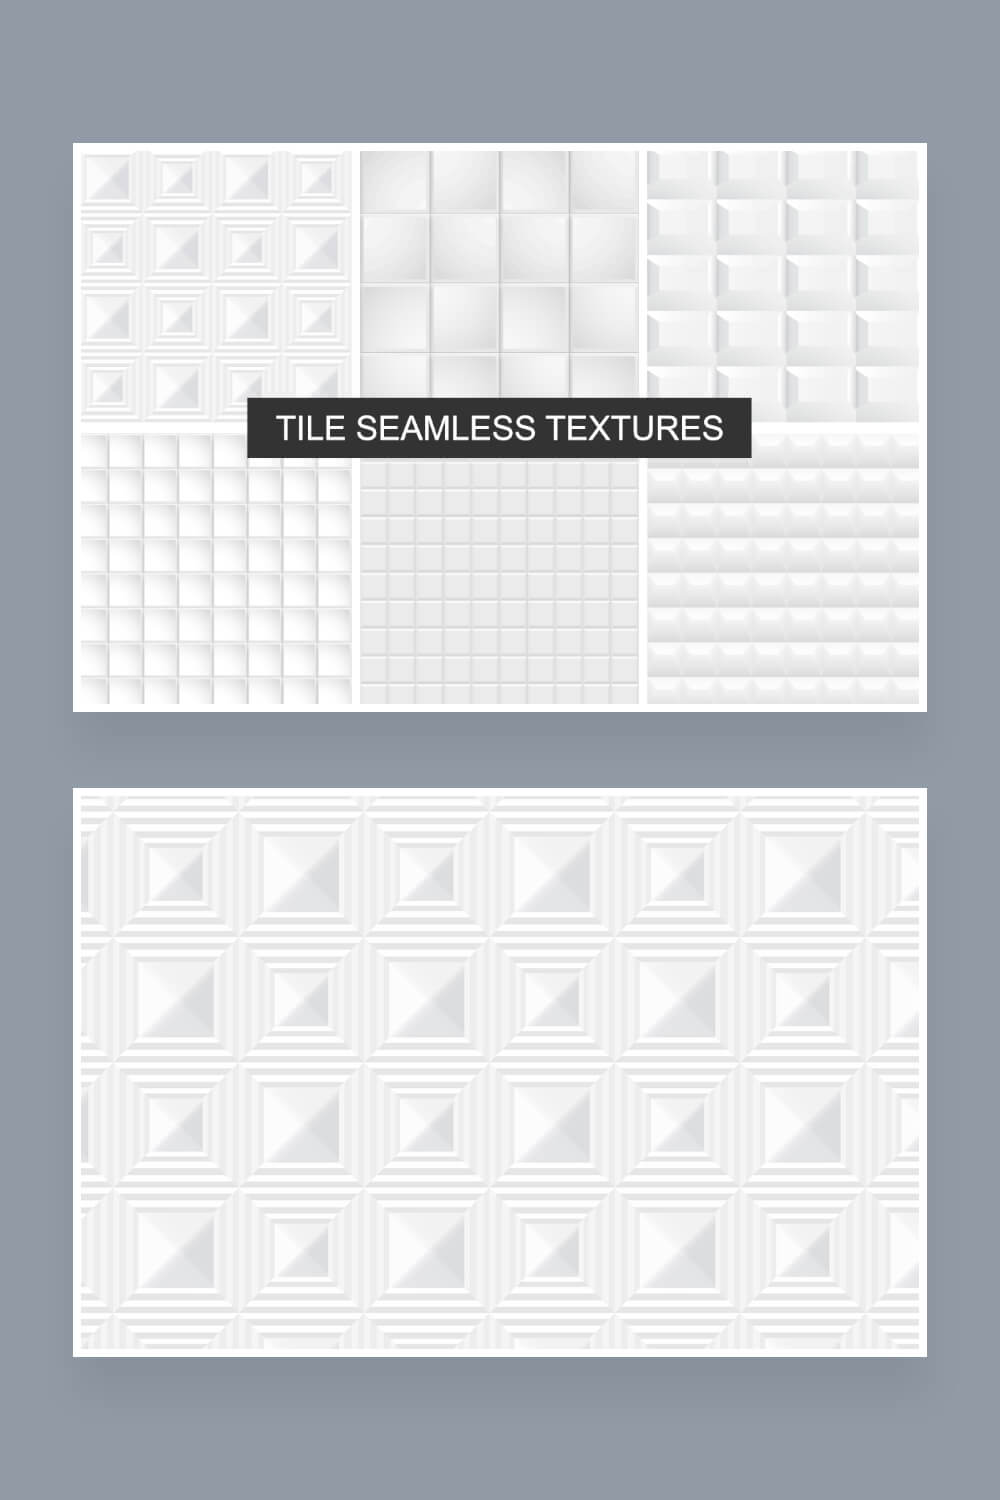 white and gray tile textures pinterest image.